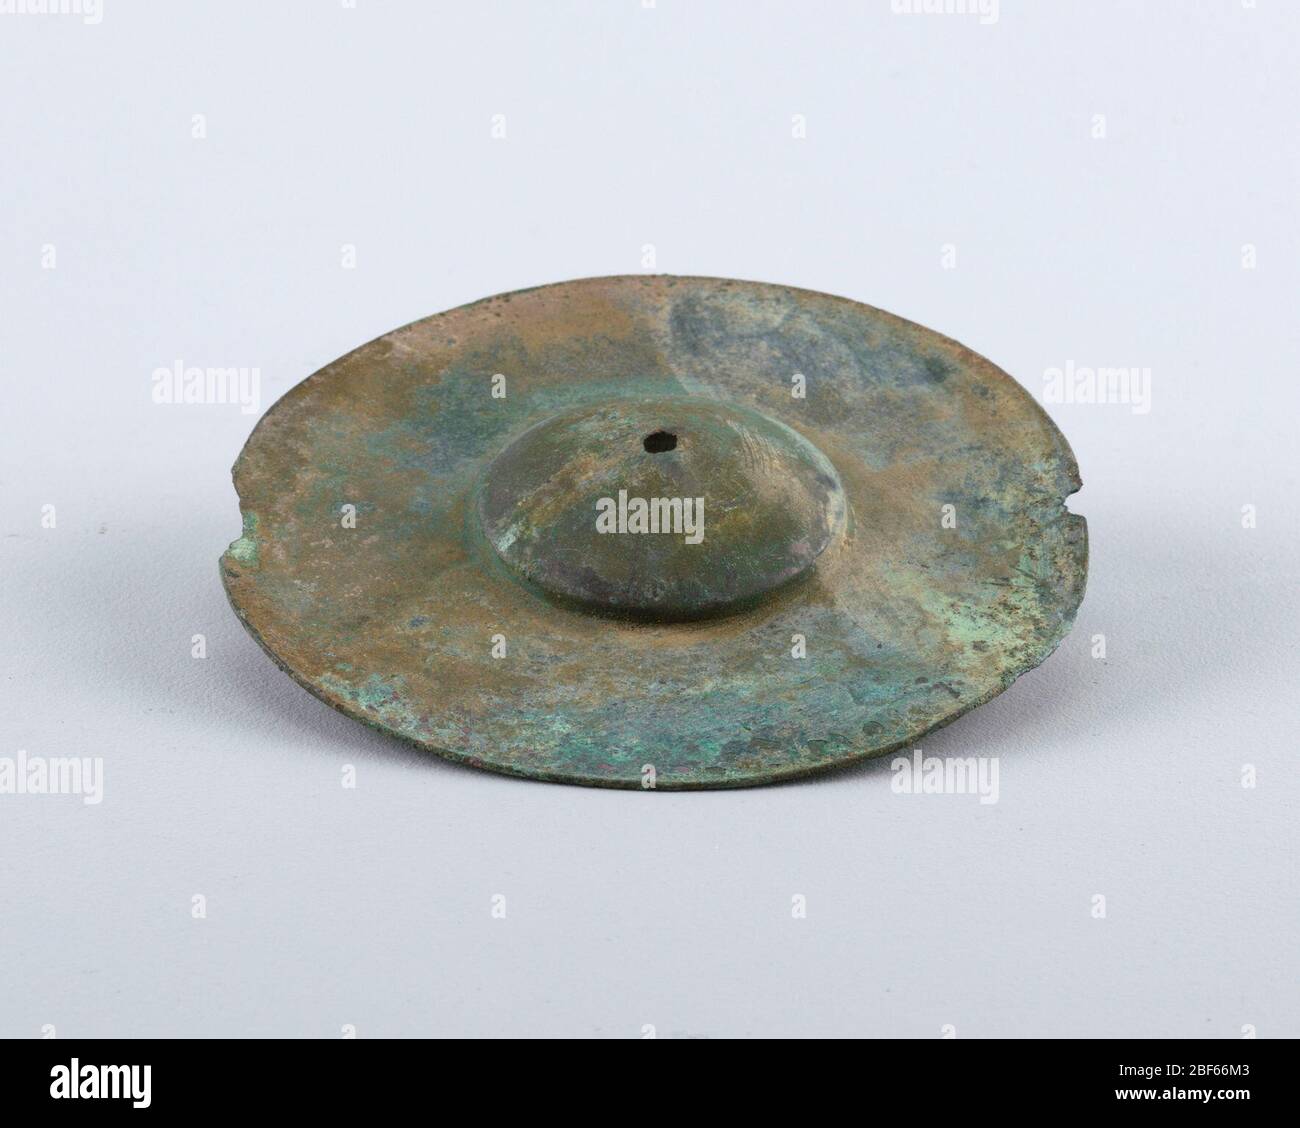 Cymbals. Circular form with raised dome, small hole in center. Green patina. Stock Photo